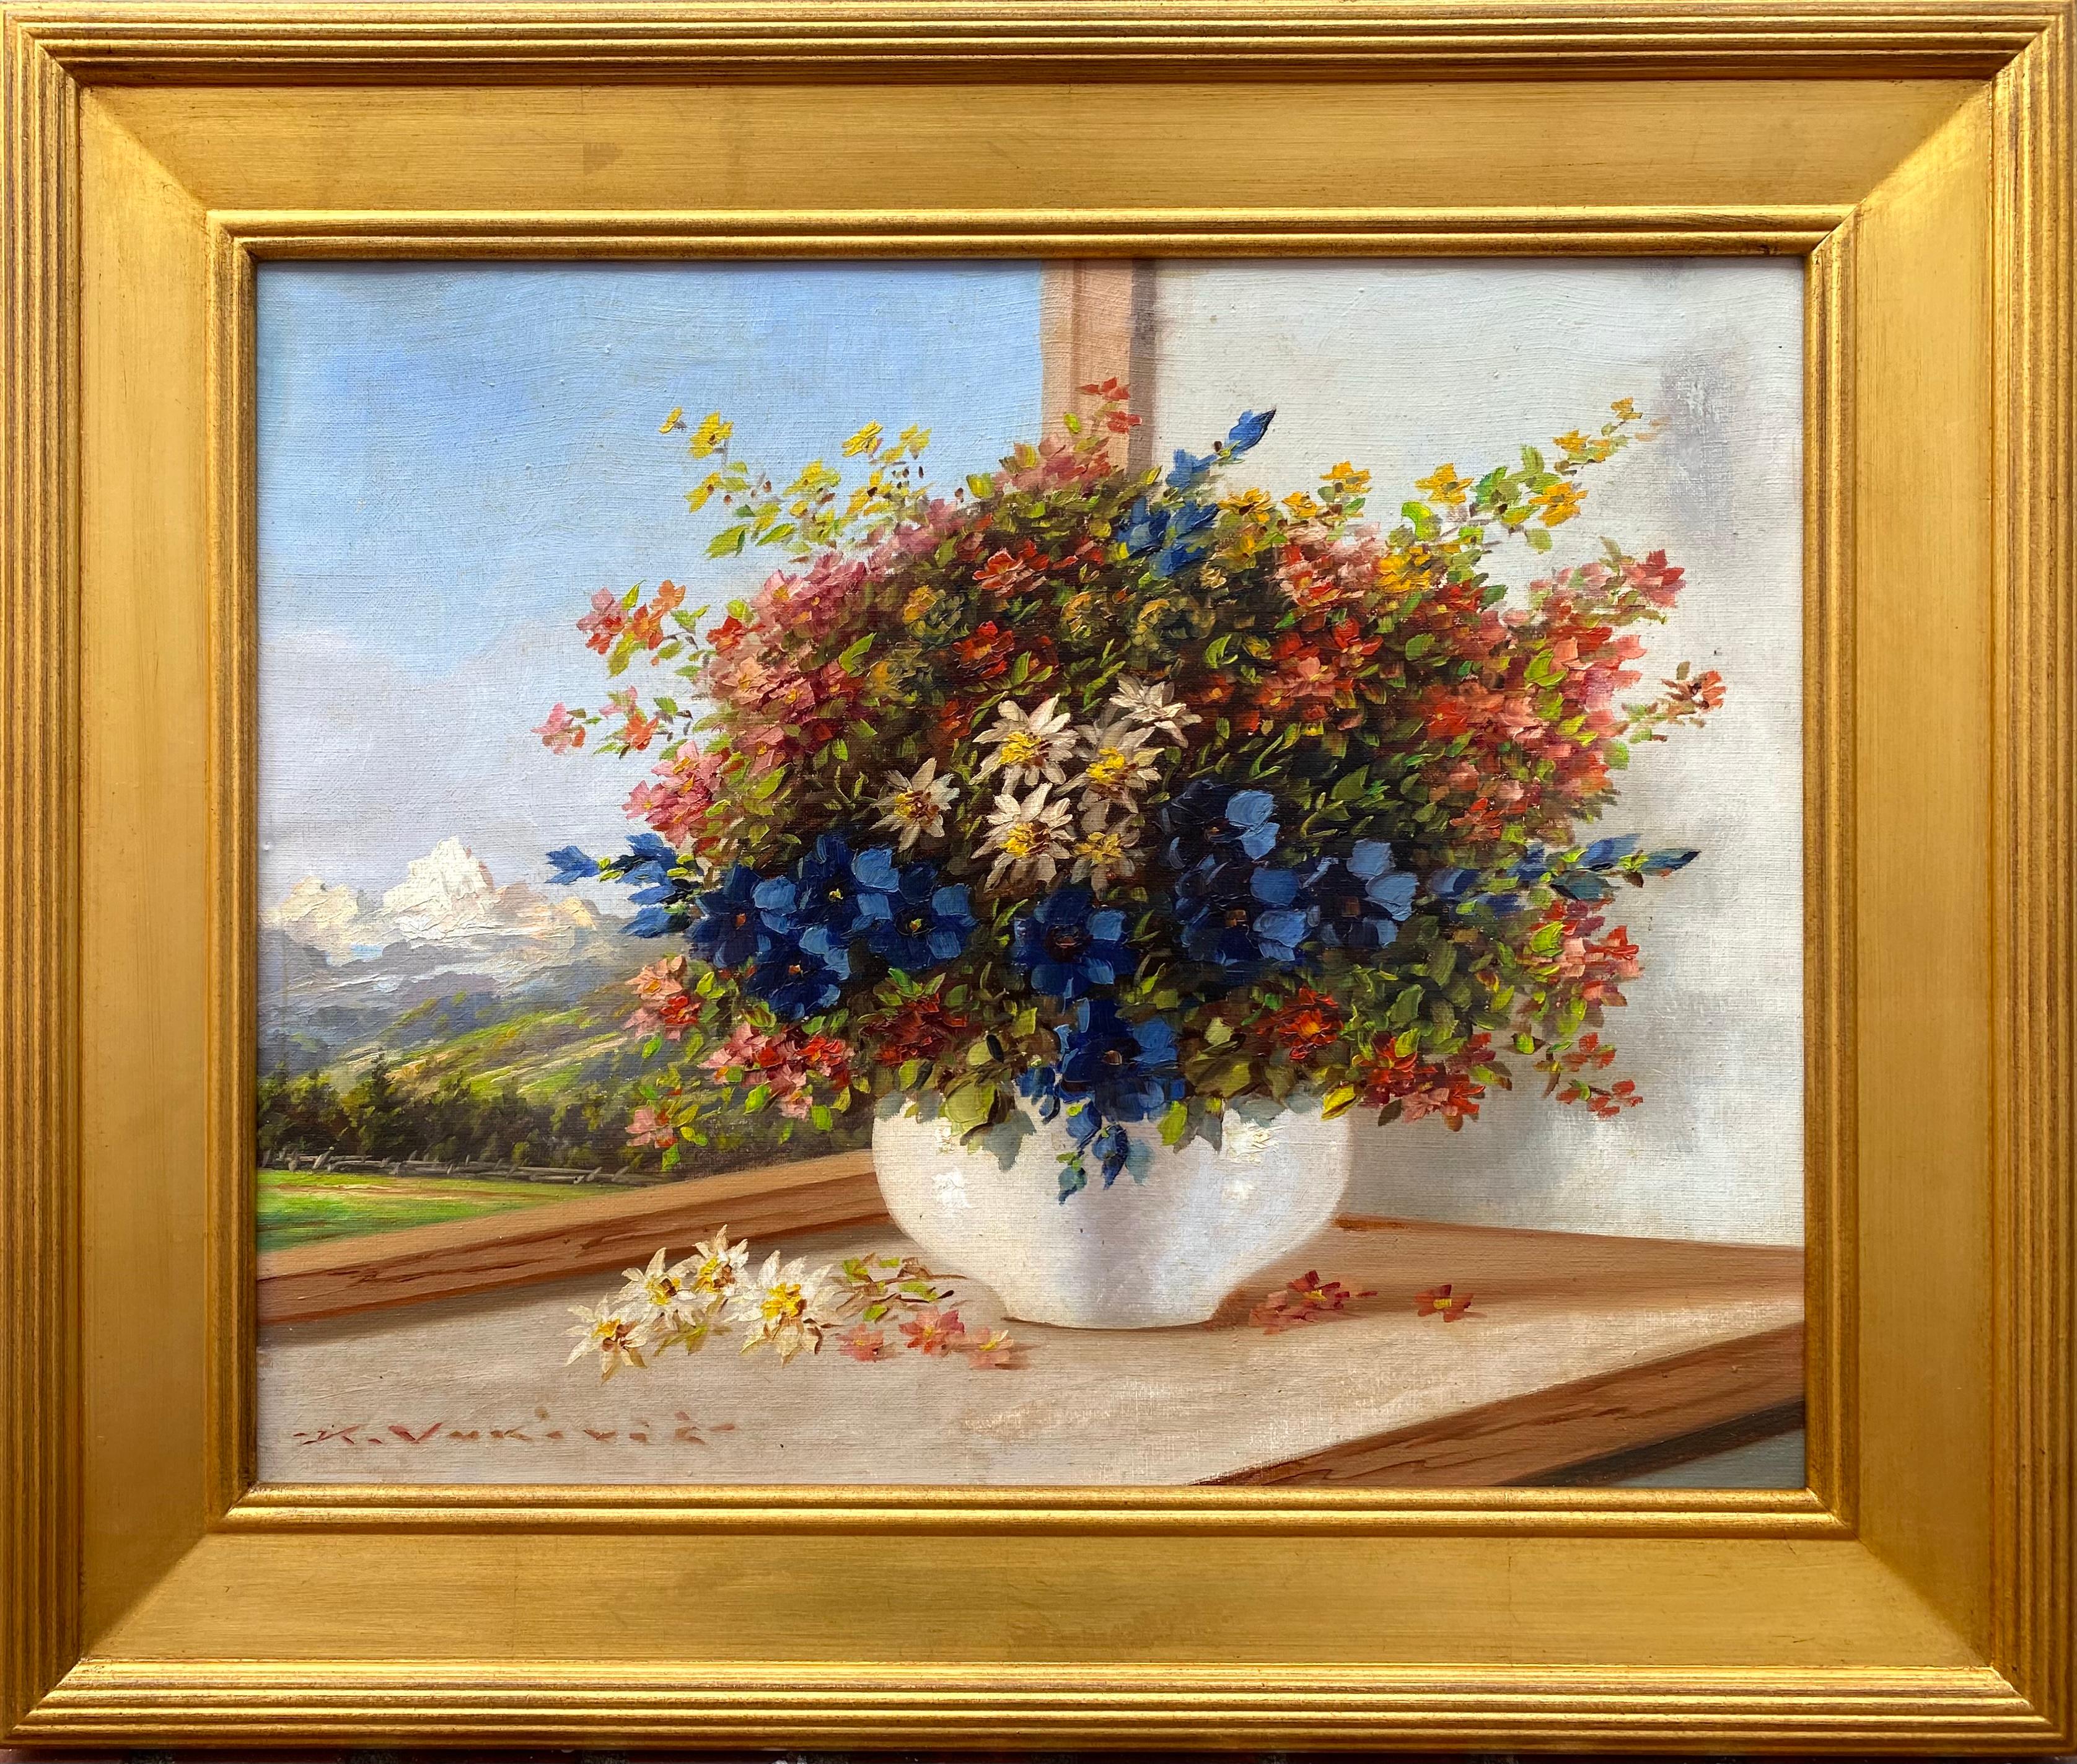 Original oil on canvas painting by the Czech born artist, Keist Vakovic. Signed lower left. Condition is good.  Newly professionally framed in contemporary gold gallery frame.  Overall framed measurements are 22 by 25.5 inches.
	
Keist Vakovic (Born